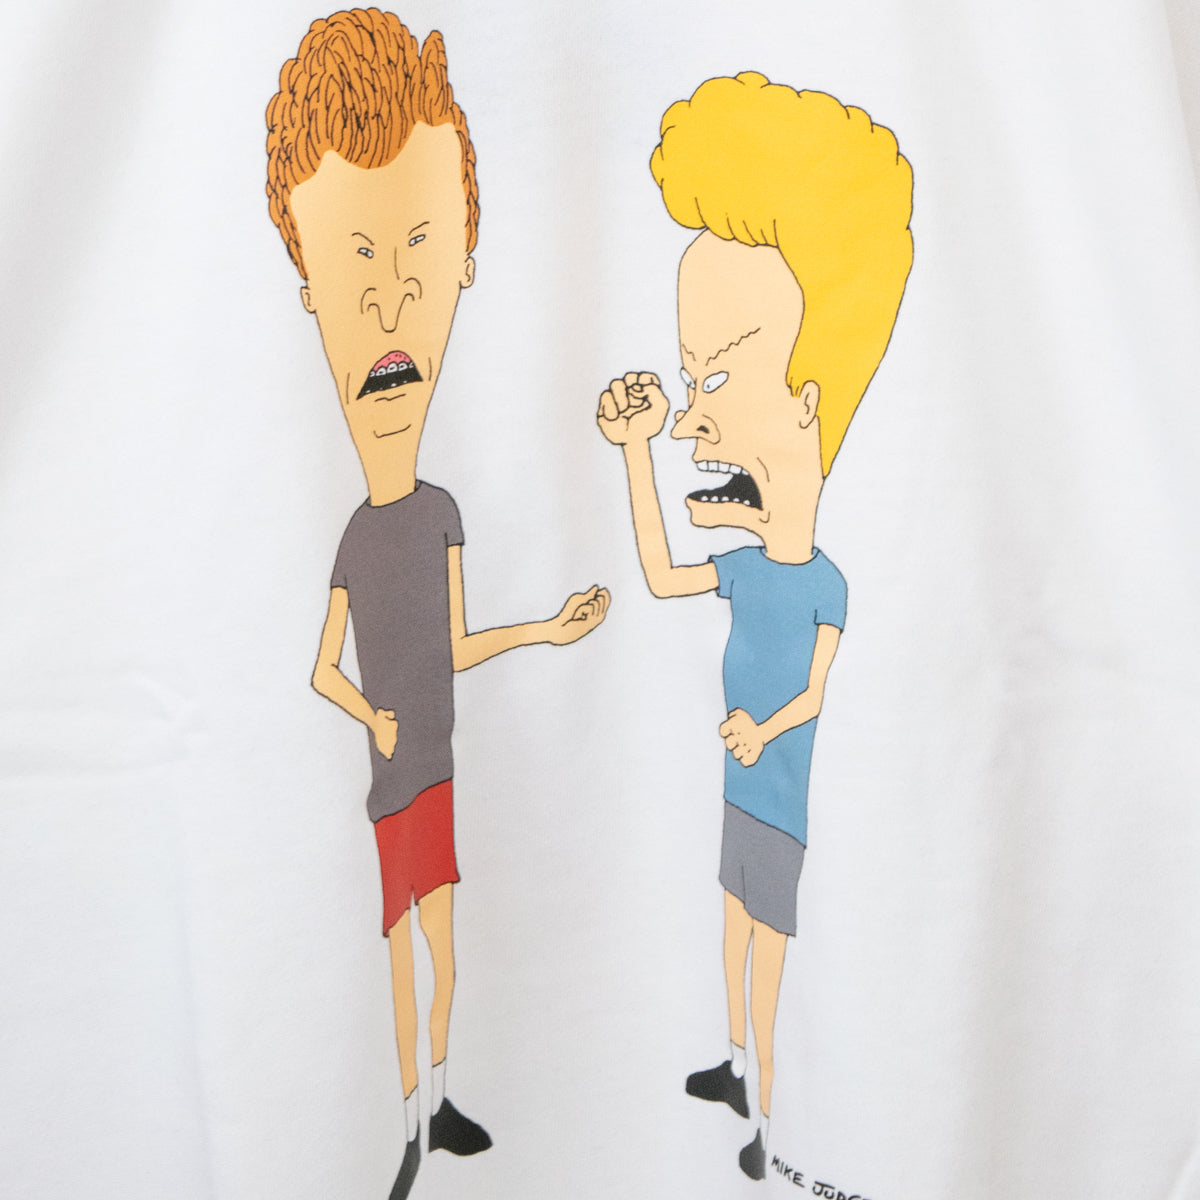 BEAVIS AND BUTT-HEAD Character Print Sweat Top WHITE